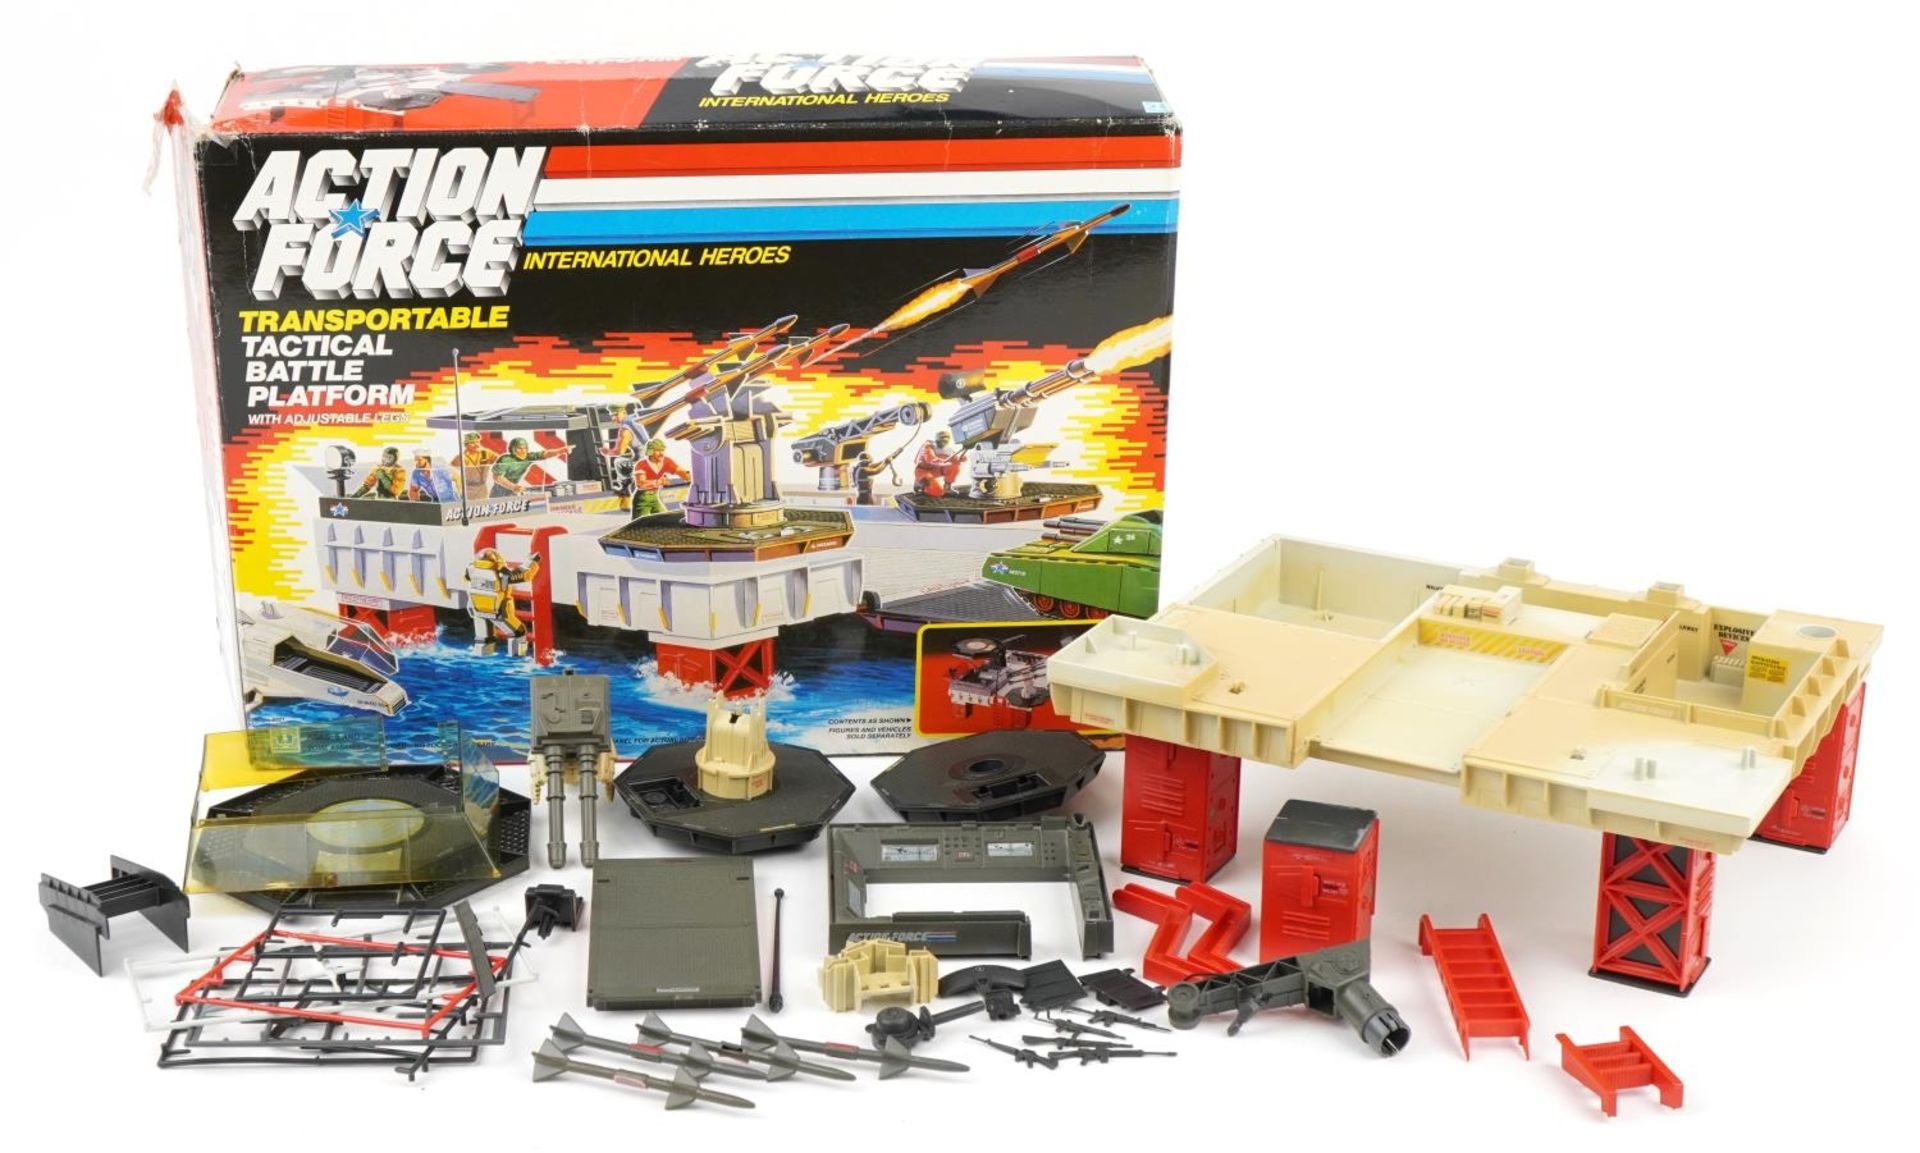 1986 Action Force International Heroes transportable tactical battle platform with box by Hasbro